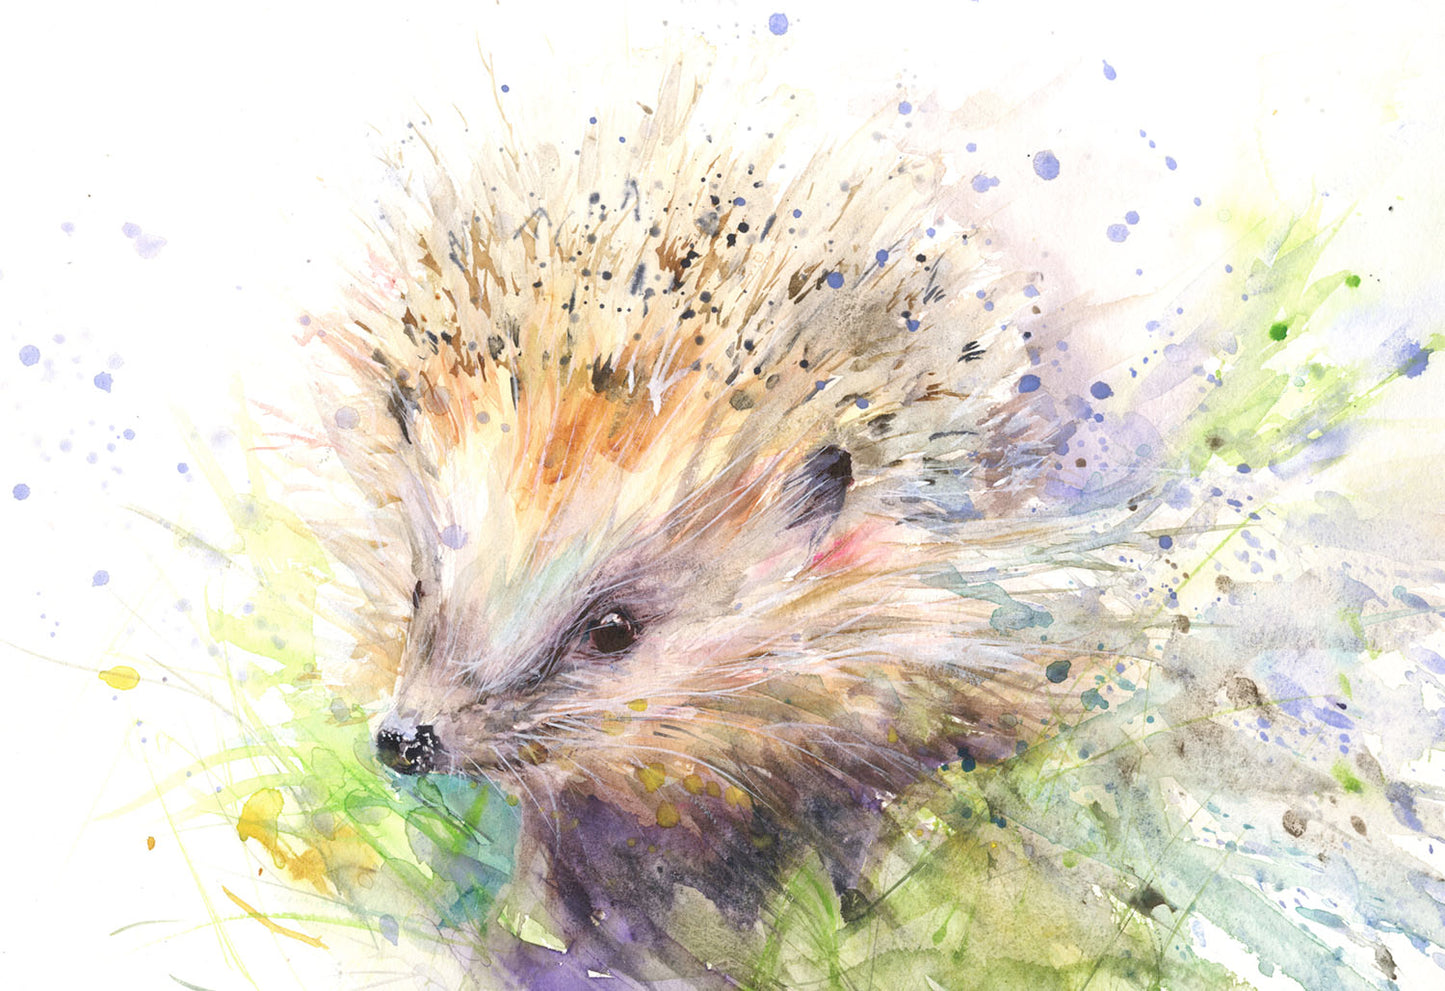 Signed limited edition PRINT of an original  HEDGEHOG watercolour painting "Lucy" - Jen Buckley Art limited edition animal art prints